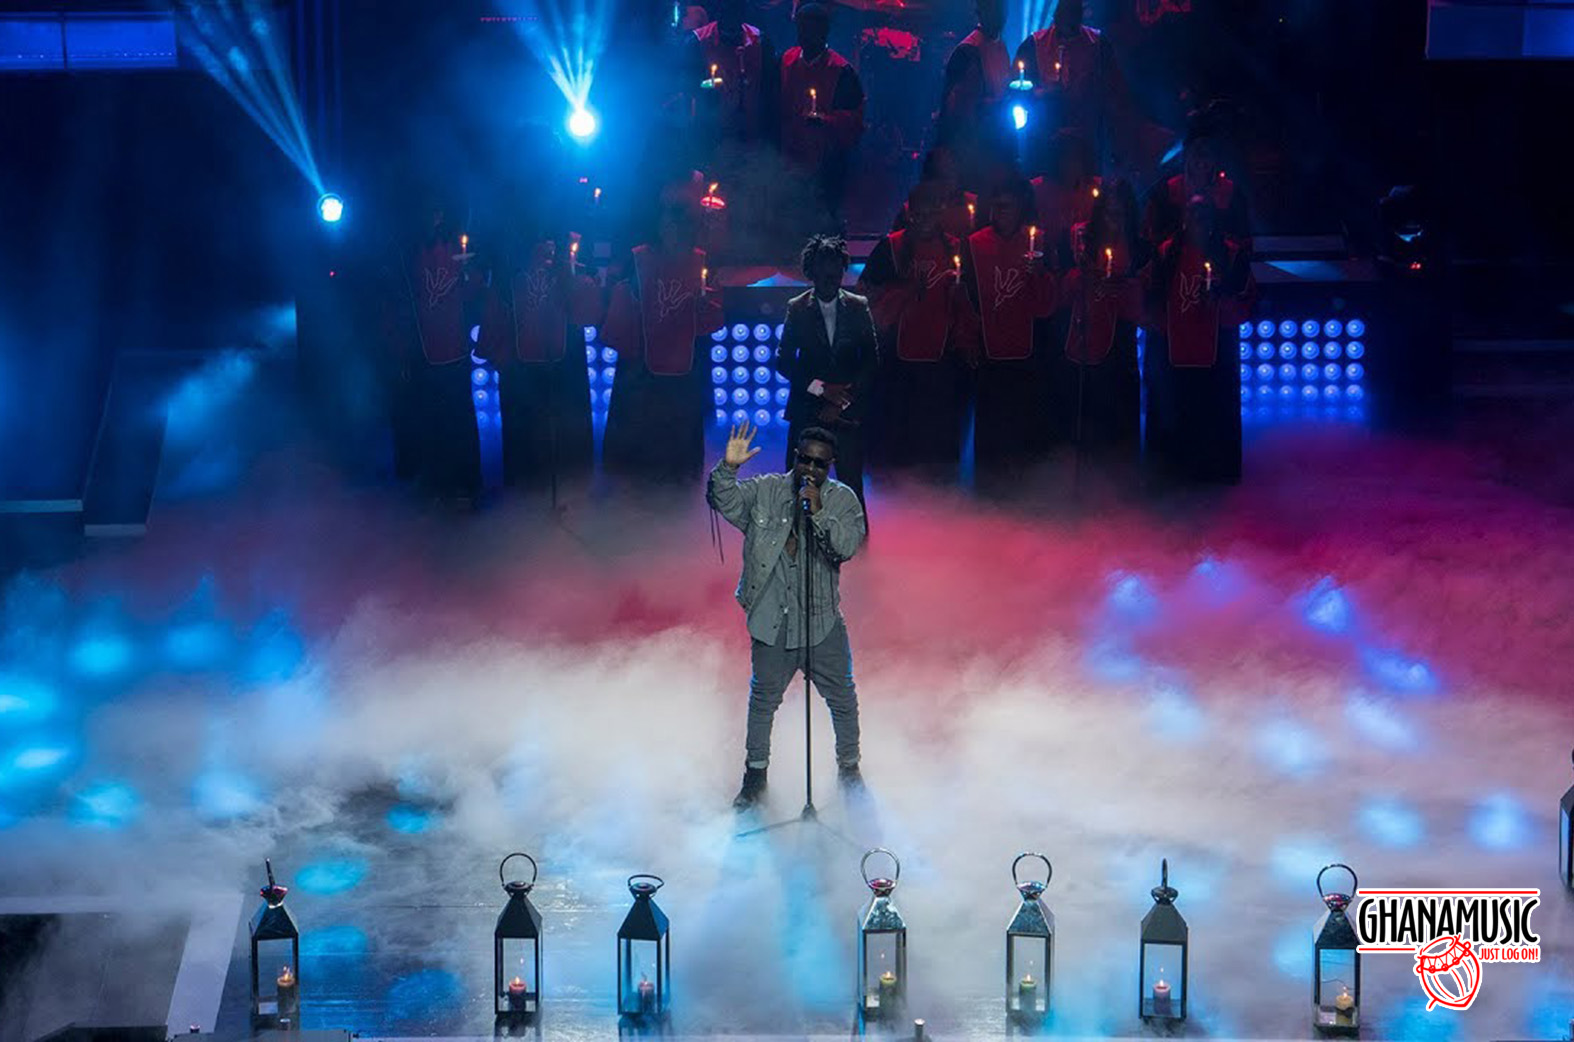 Sarkodie's holistic performance at the VGMA 2018